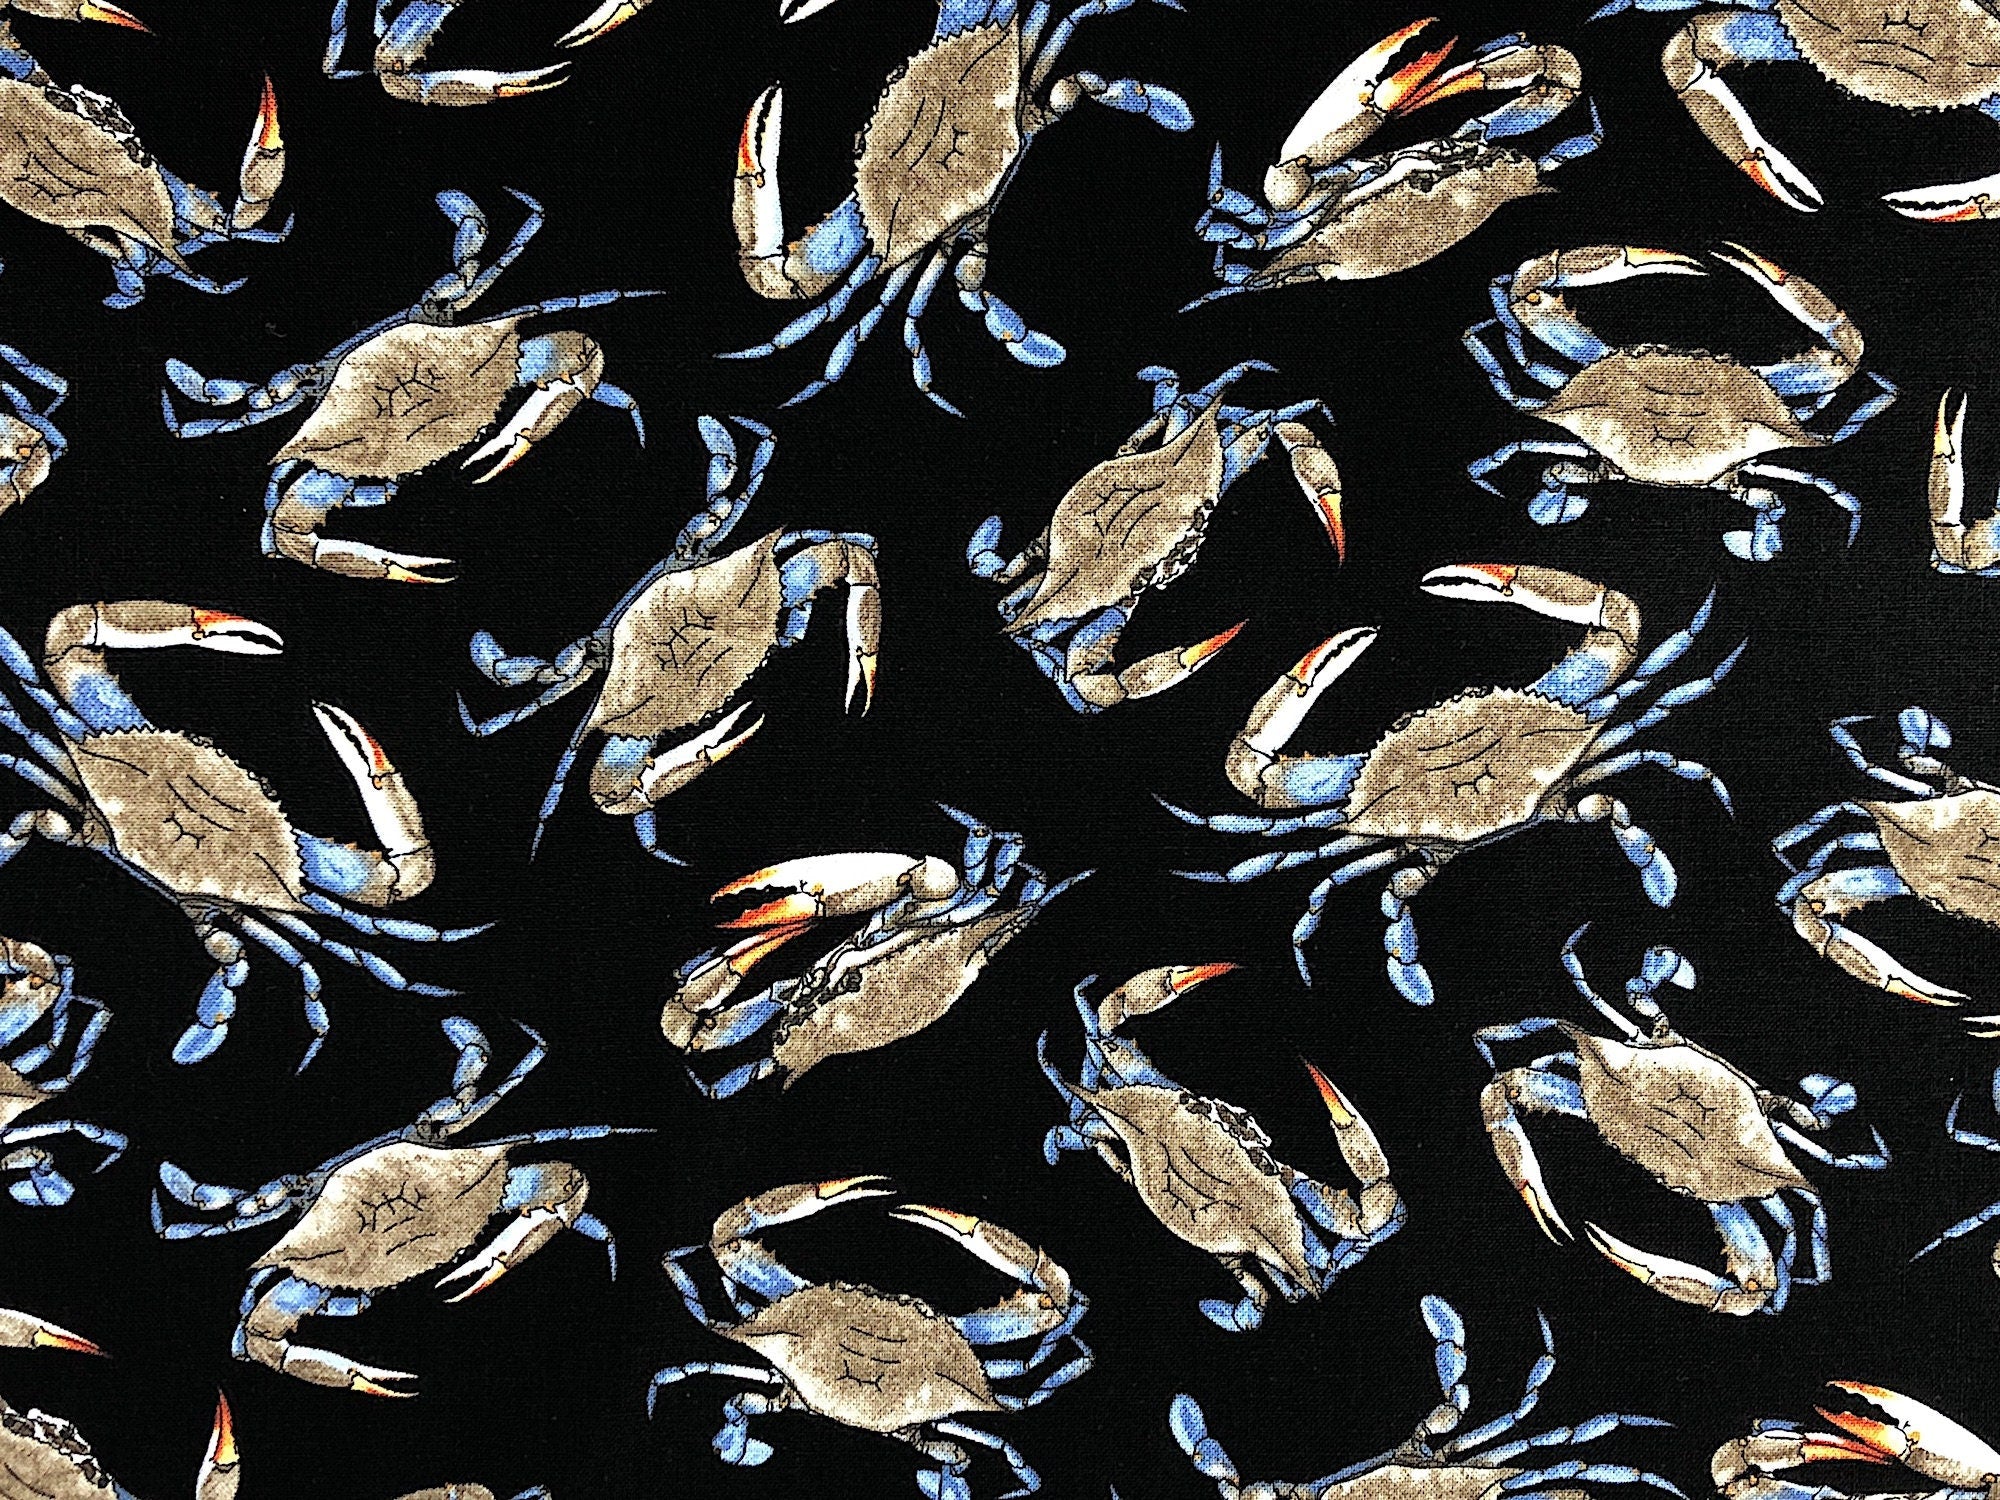 Close up of crabs on black fabric.